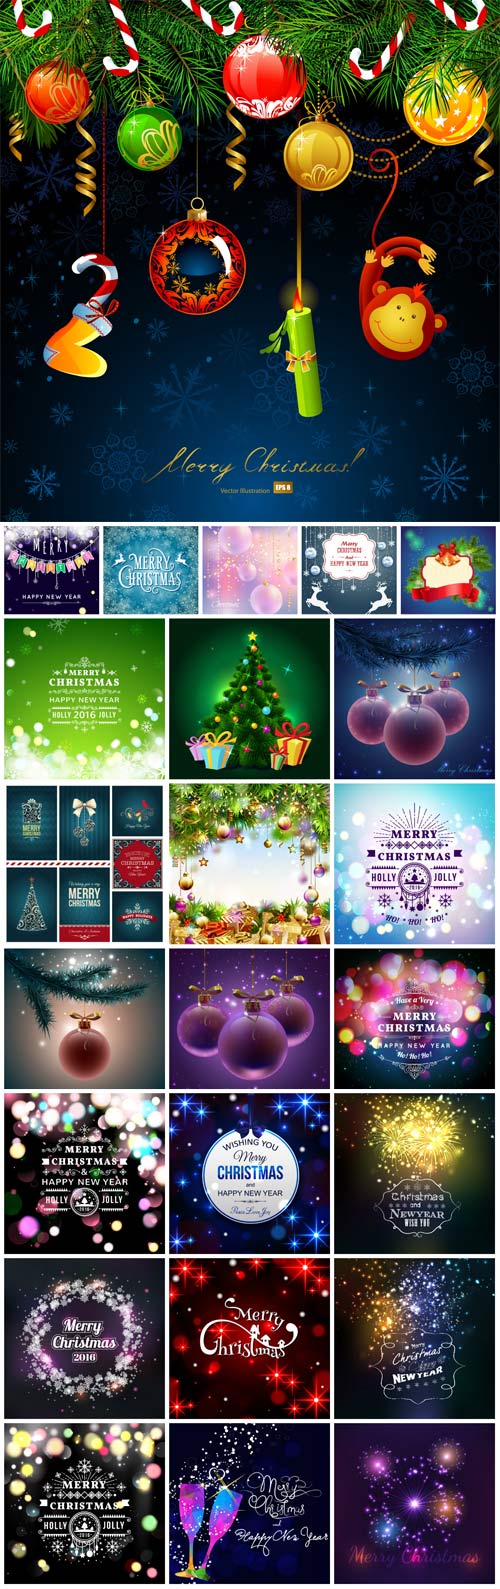 Merry Christmas, New Year vector, backgrounds, Santa Claus, Christmas tree, winter